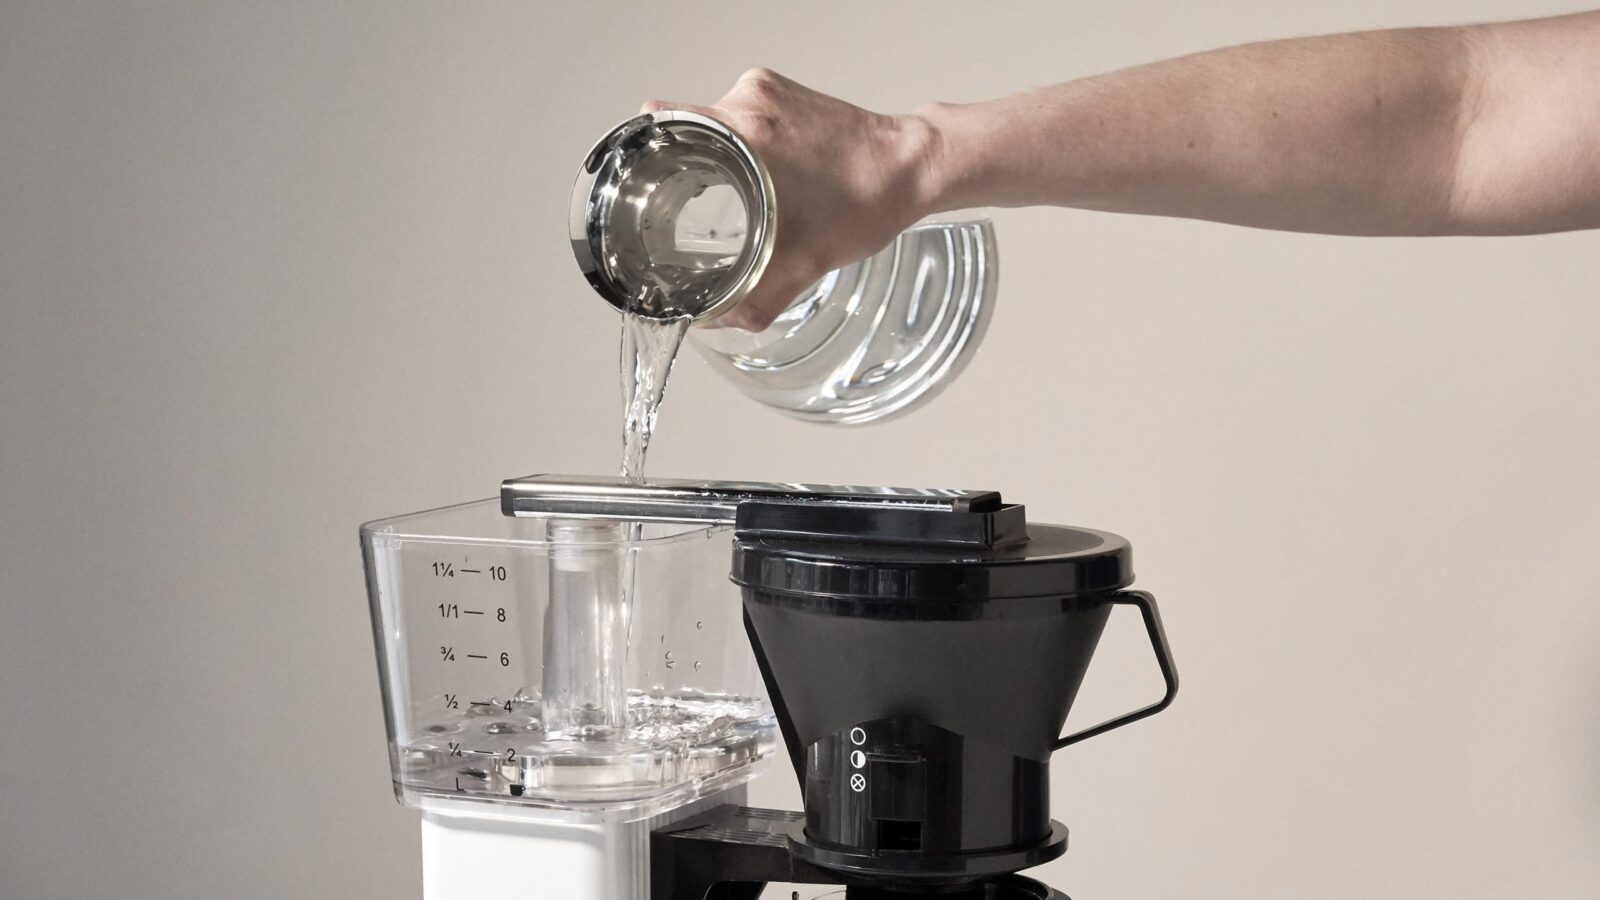 01 TRD20 Coffee Maker Water scaled - Coffee Pot